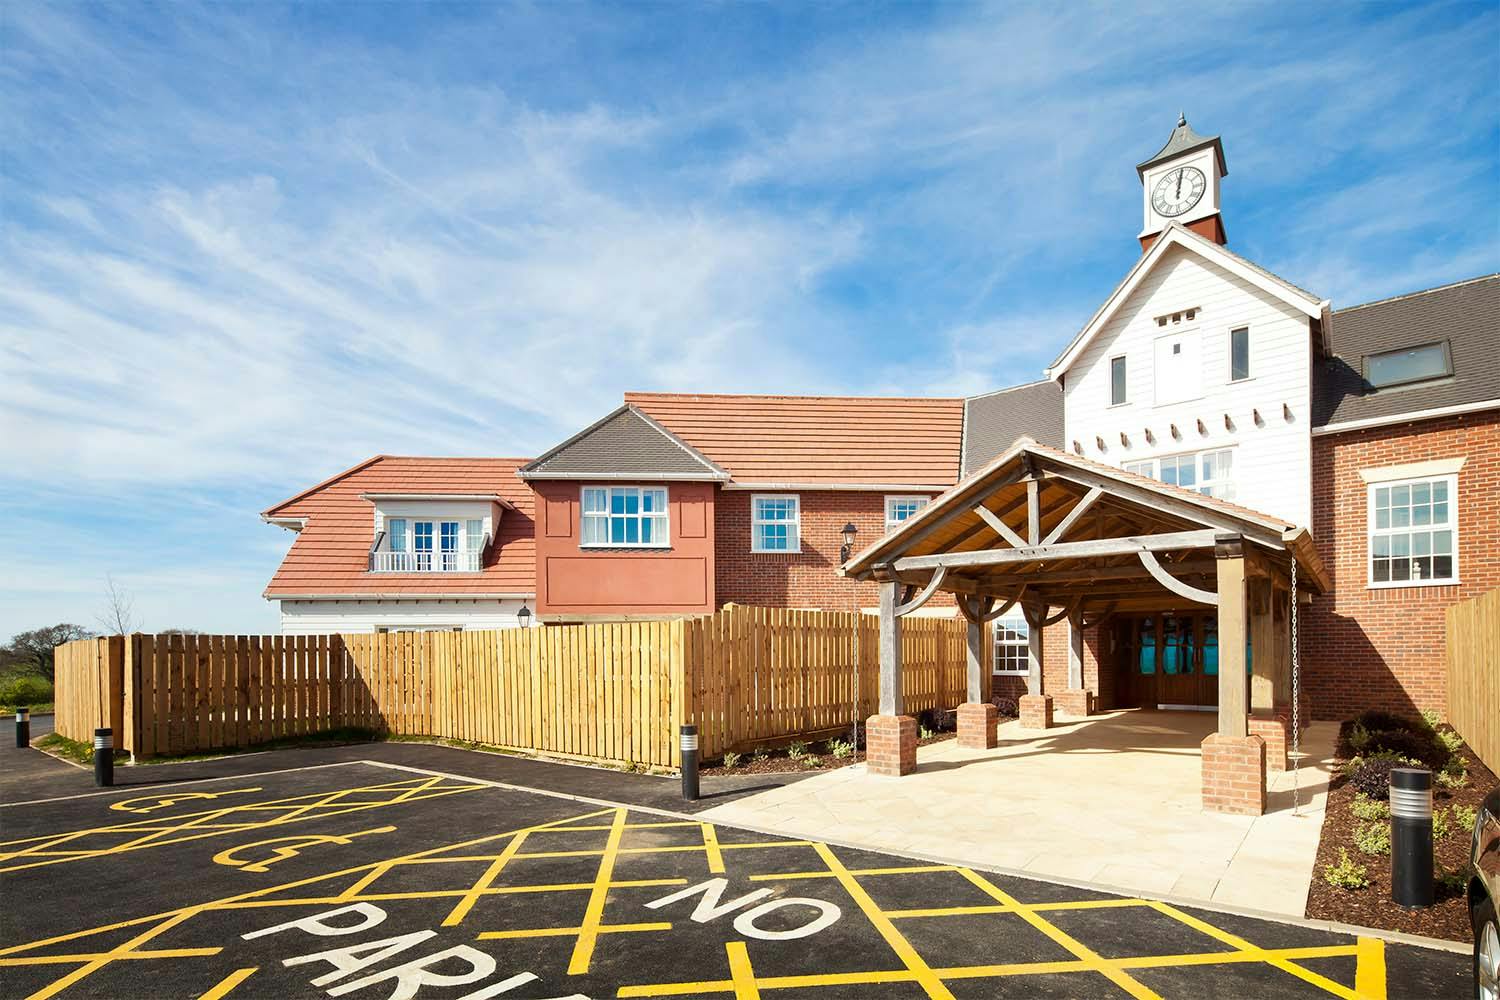 Independent Care Home - Beaumont Manor care home 4